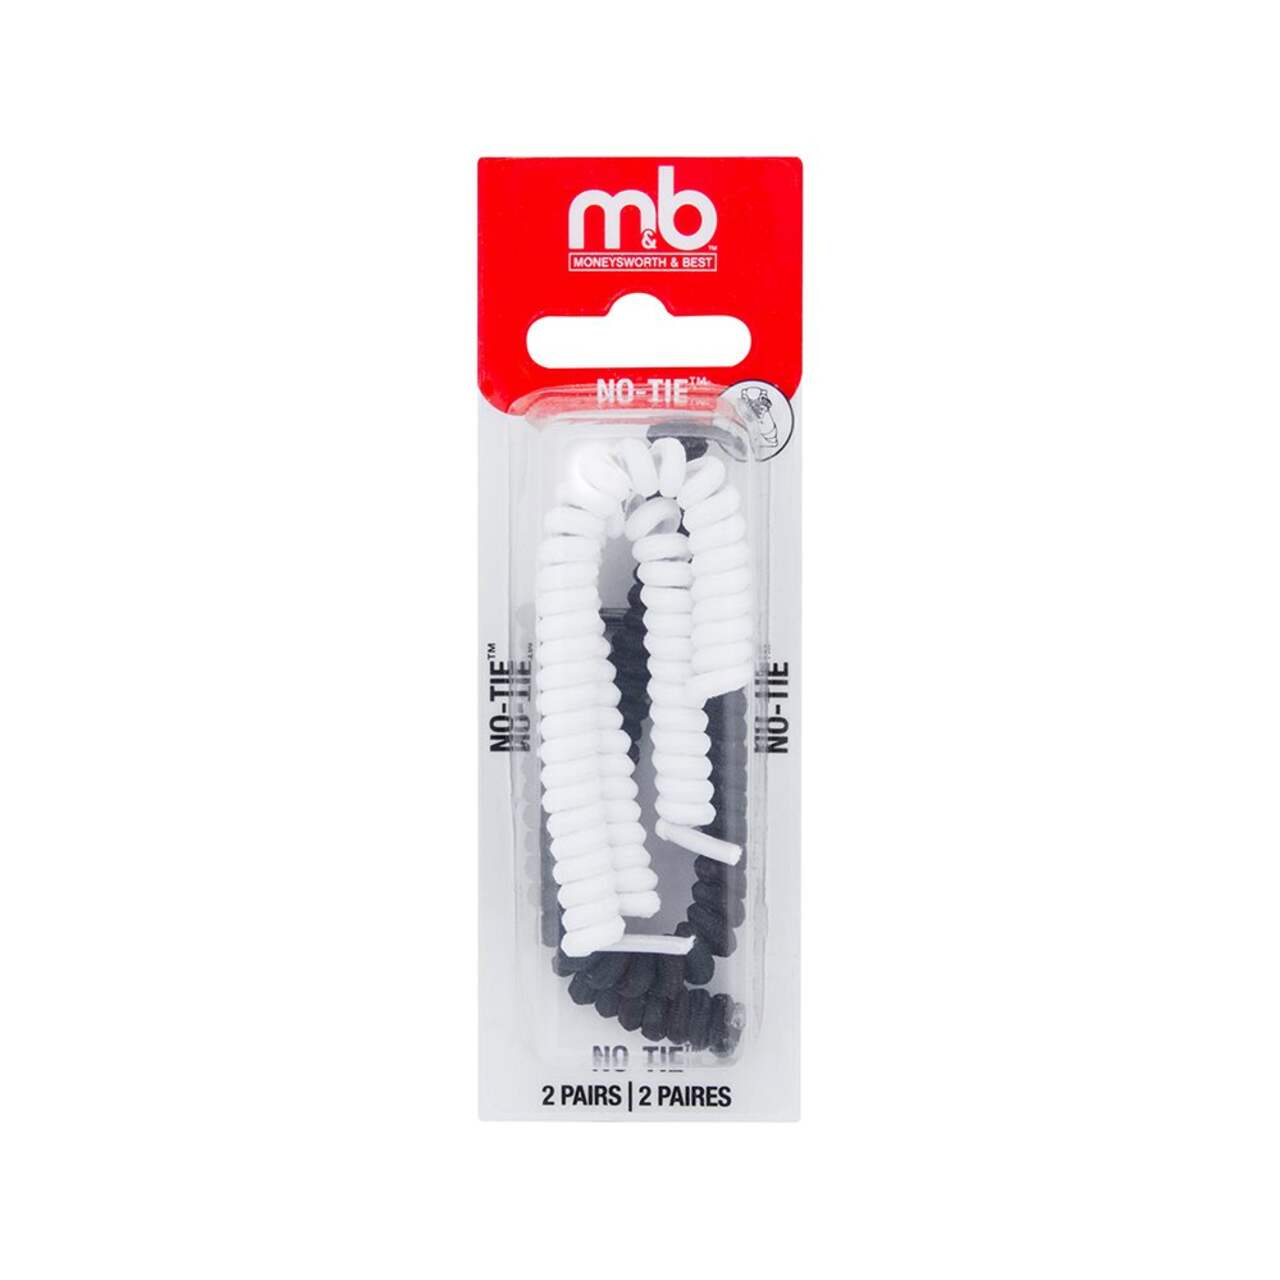 Moneysworth & Best No-Tie Shoe Laces for Kids and Adults, 36-in, 2-pk,  Black/White